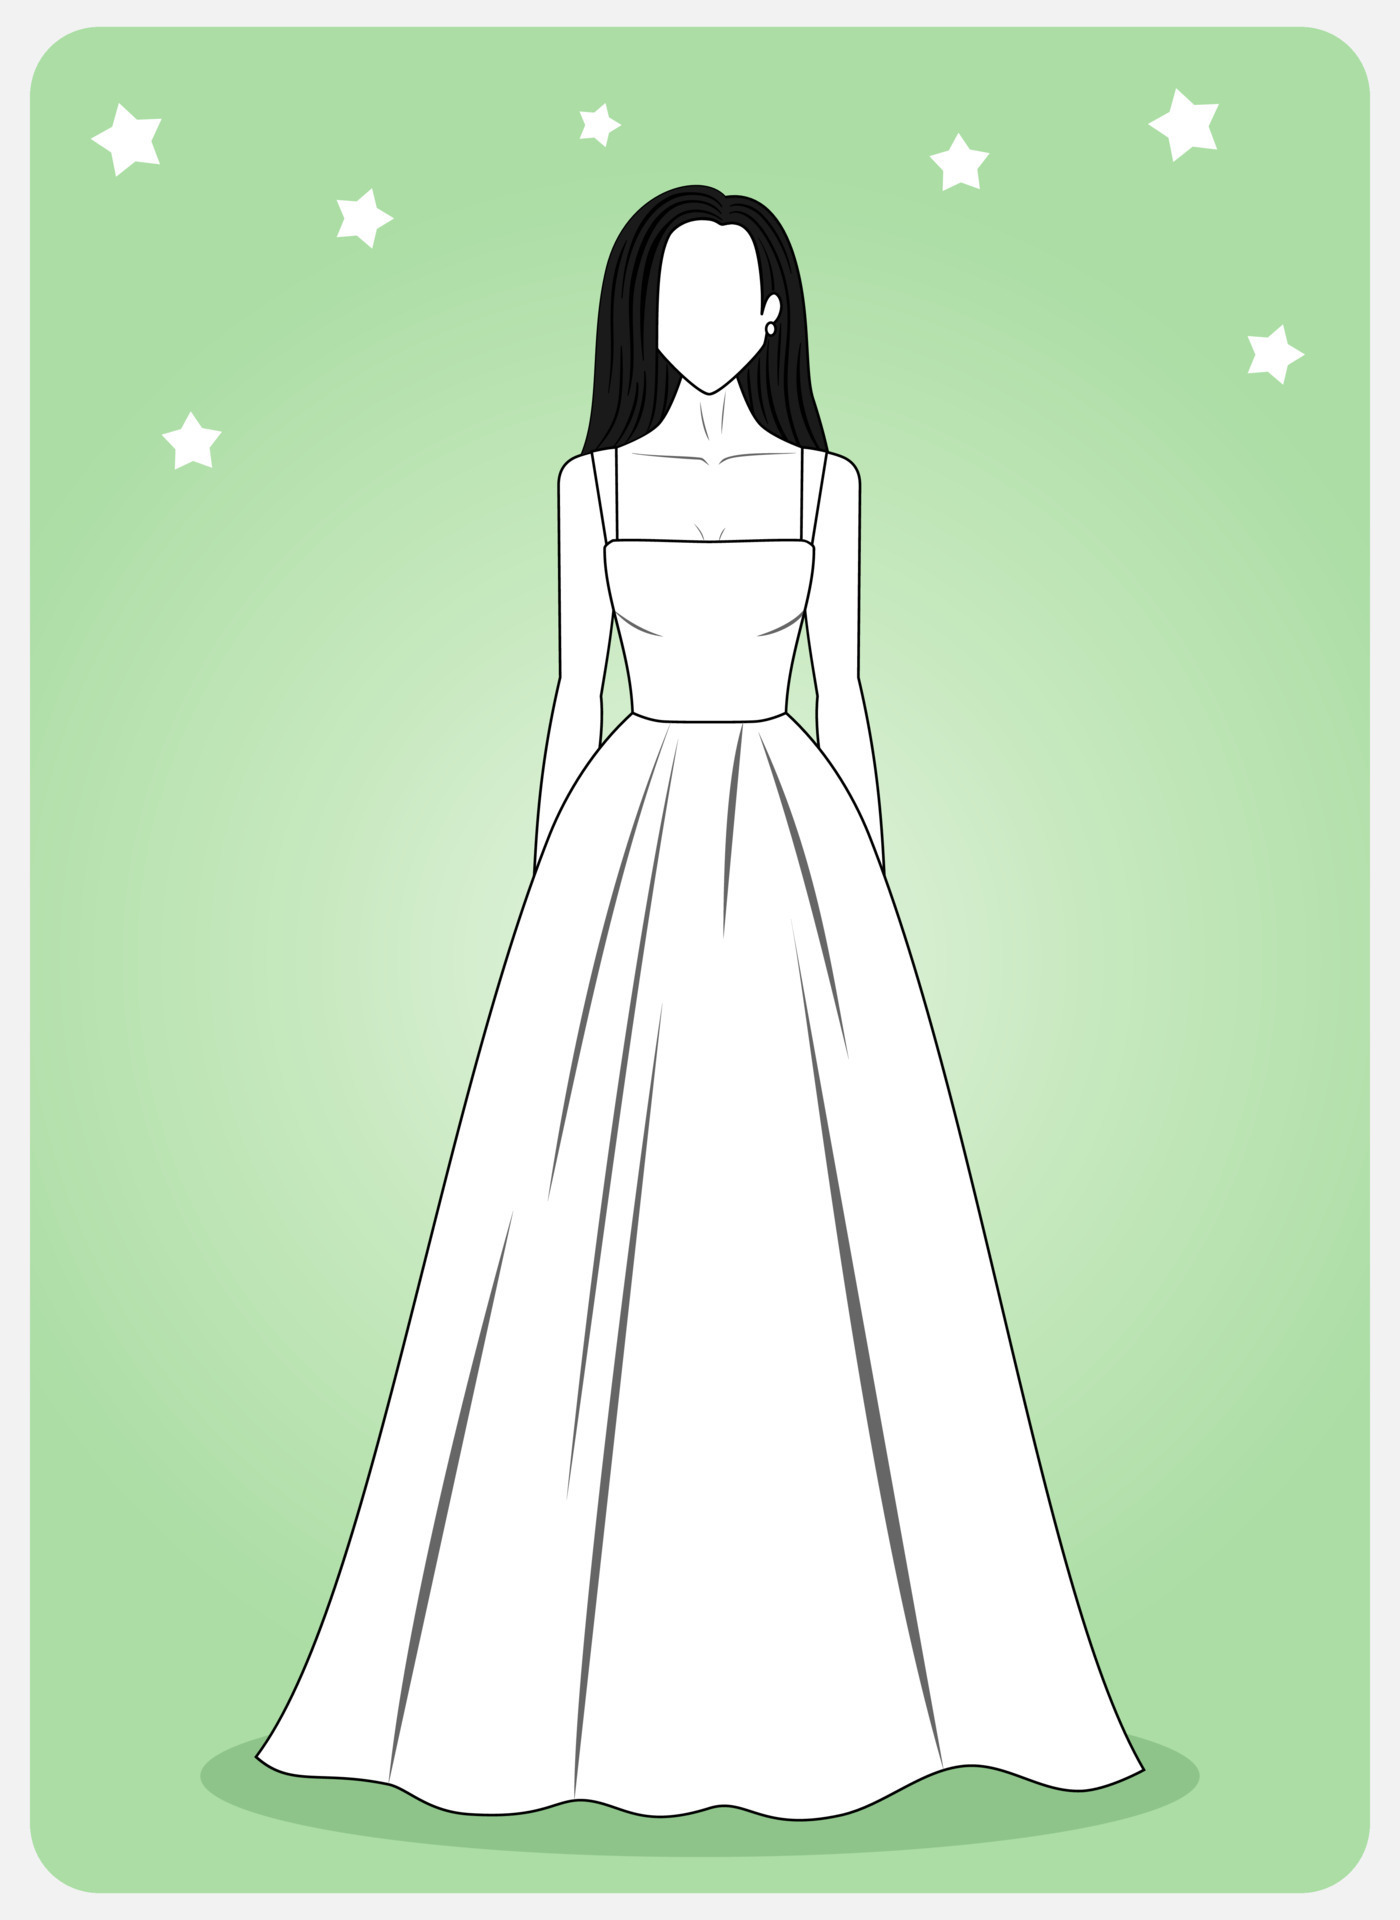 Learn How to Draw Girls Fashion DressAmazoncomAppstore for Android